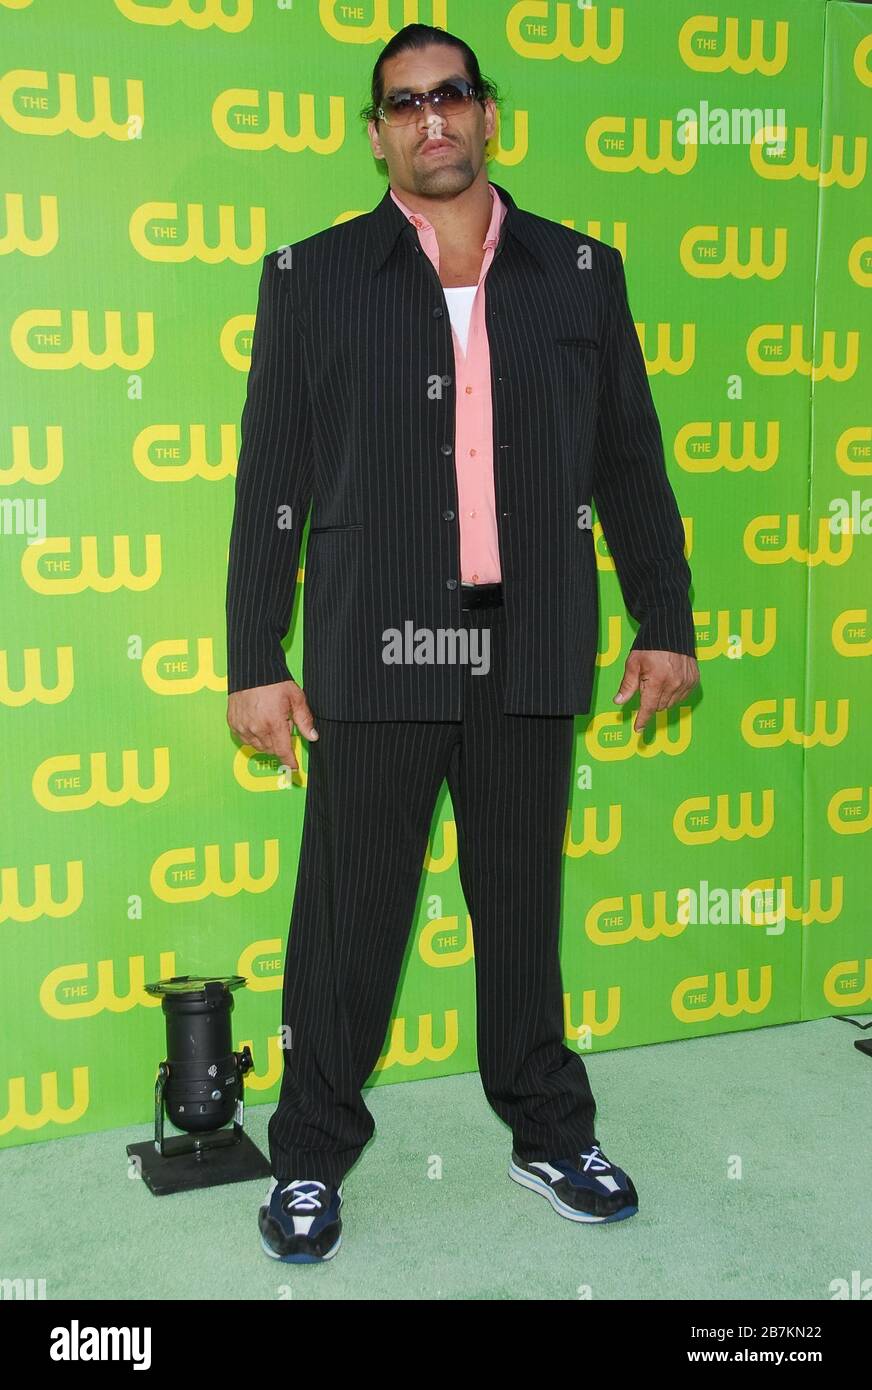 The Great Khali at The CW Network Launch Party held at the Warner Bros. Studios - Main Lot in Burbank, CA. The event took place on Monday, September 18, 2006.  Photo by: SBM / PictureLux - File Reference # 33984-6975SBMPLX Stock Photo